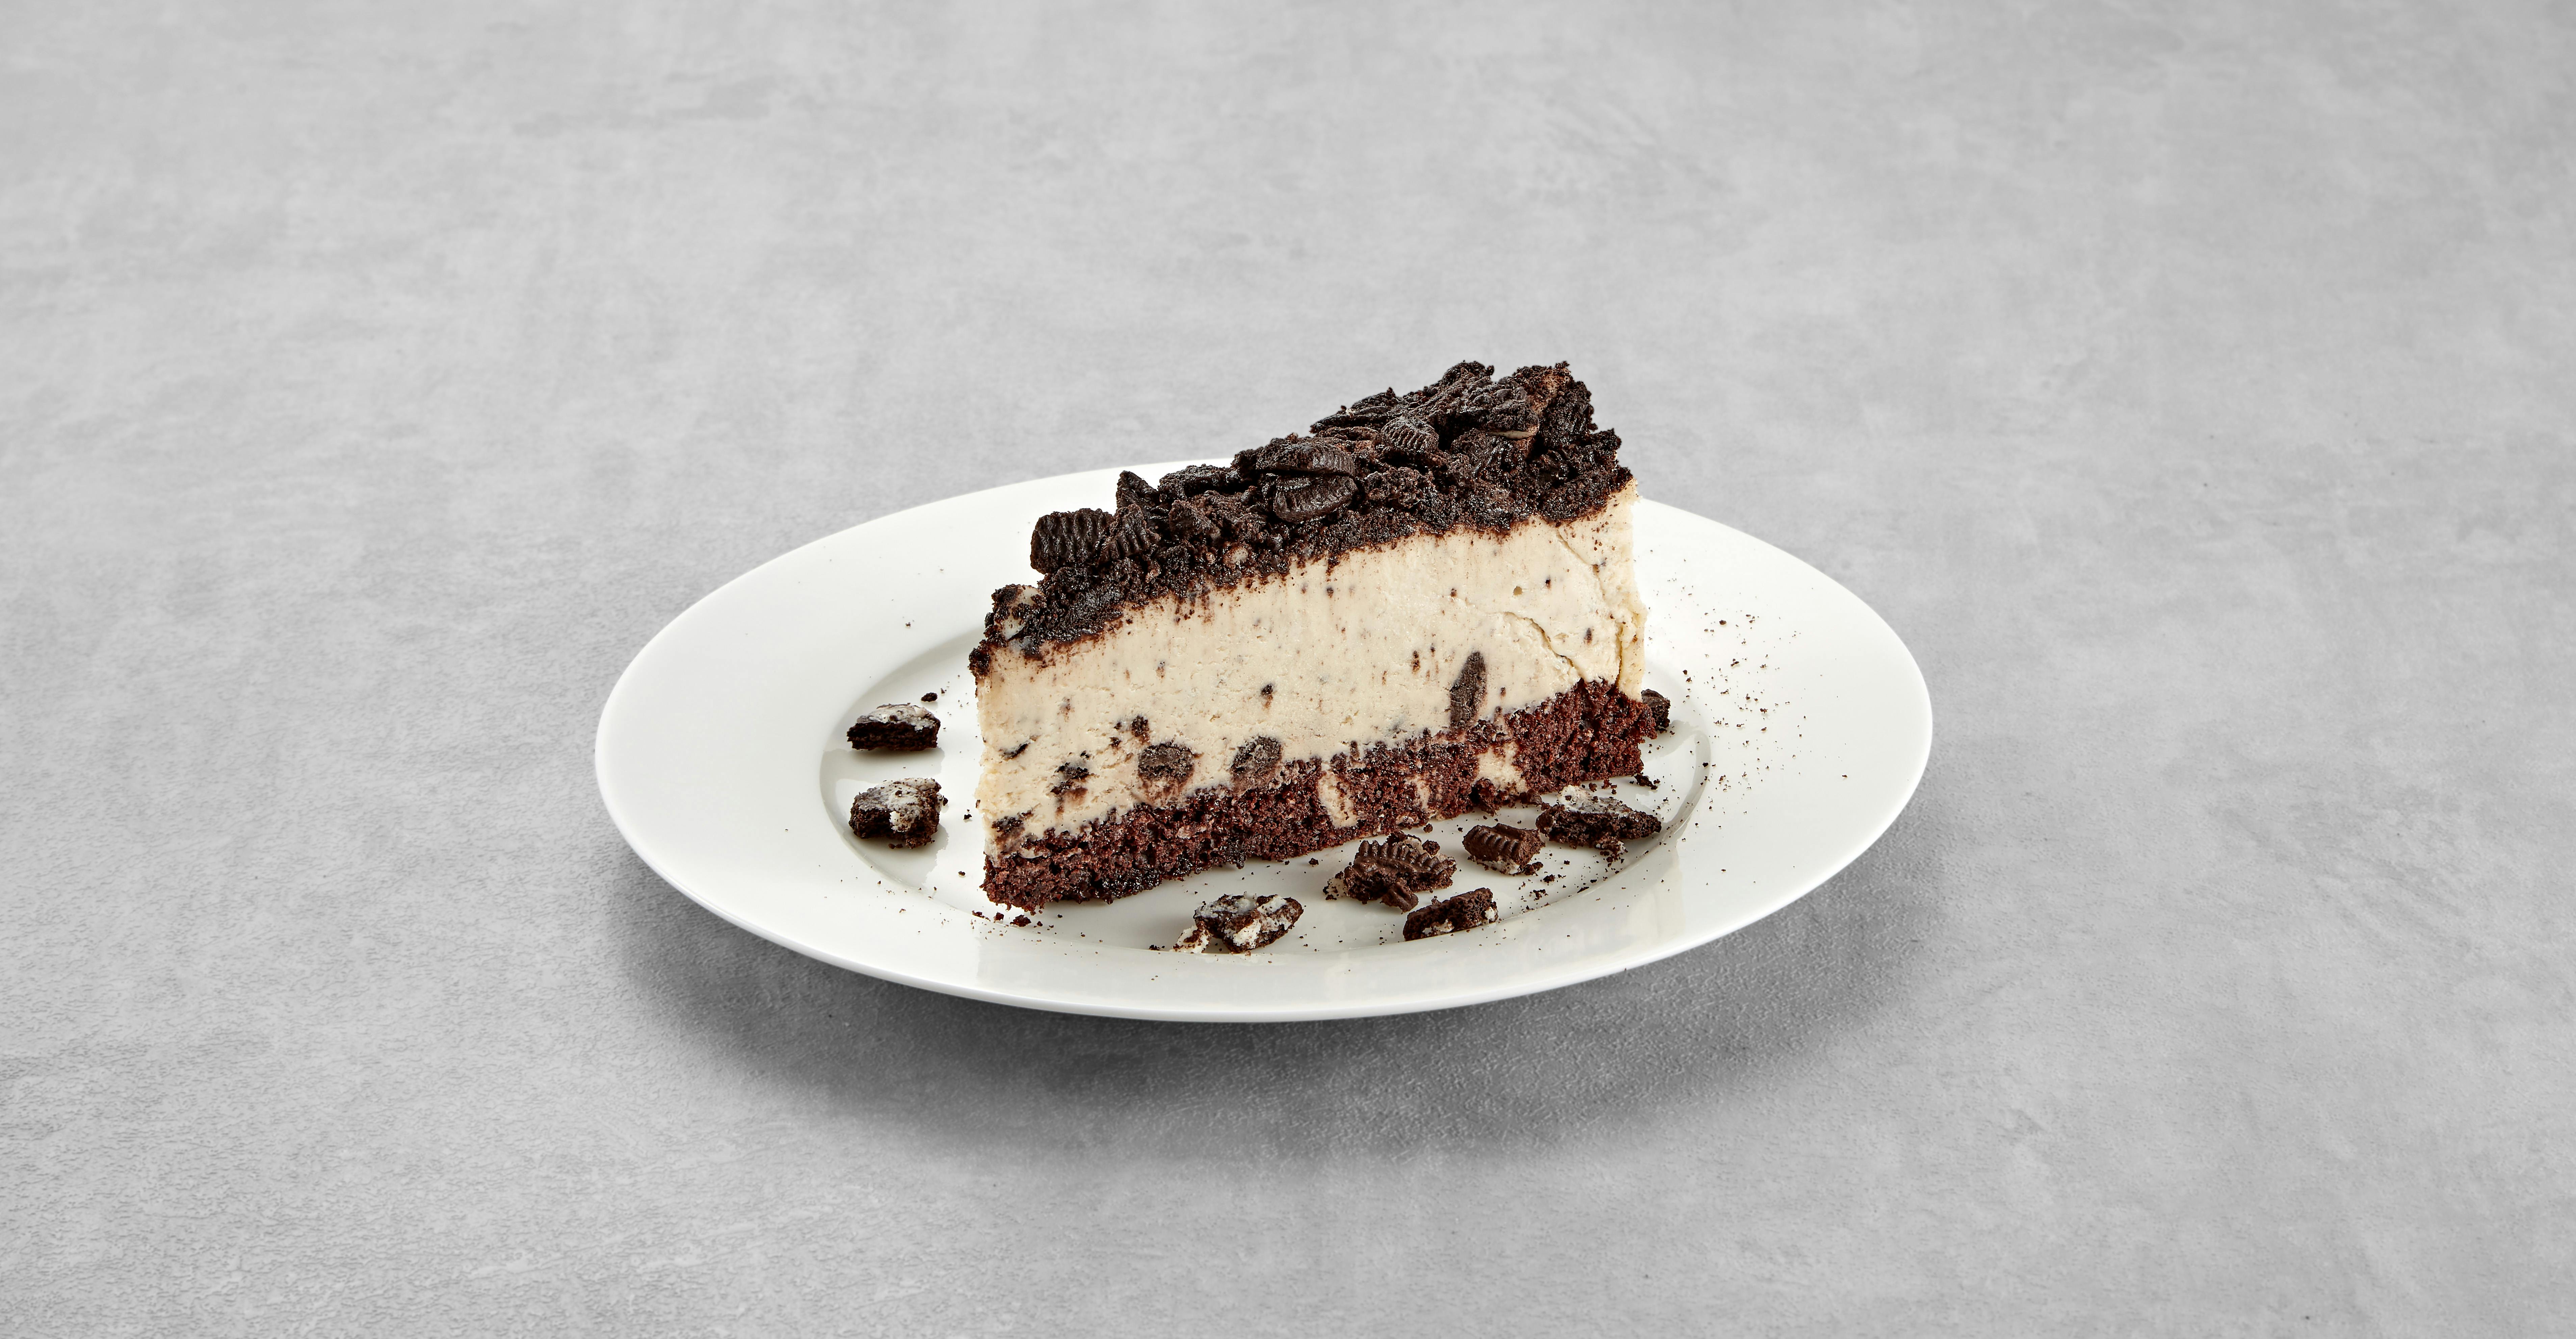 Oreo Mousse Cake from Mario's Pizzeria in Seaford, NY